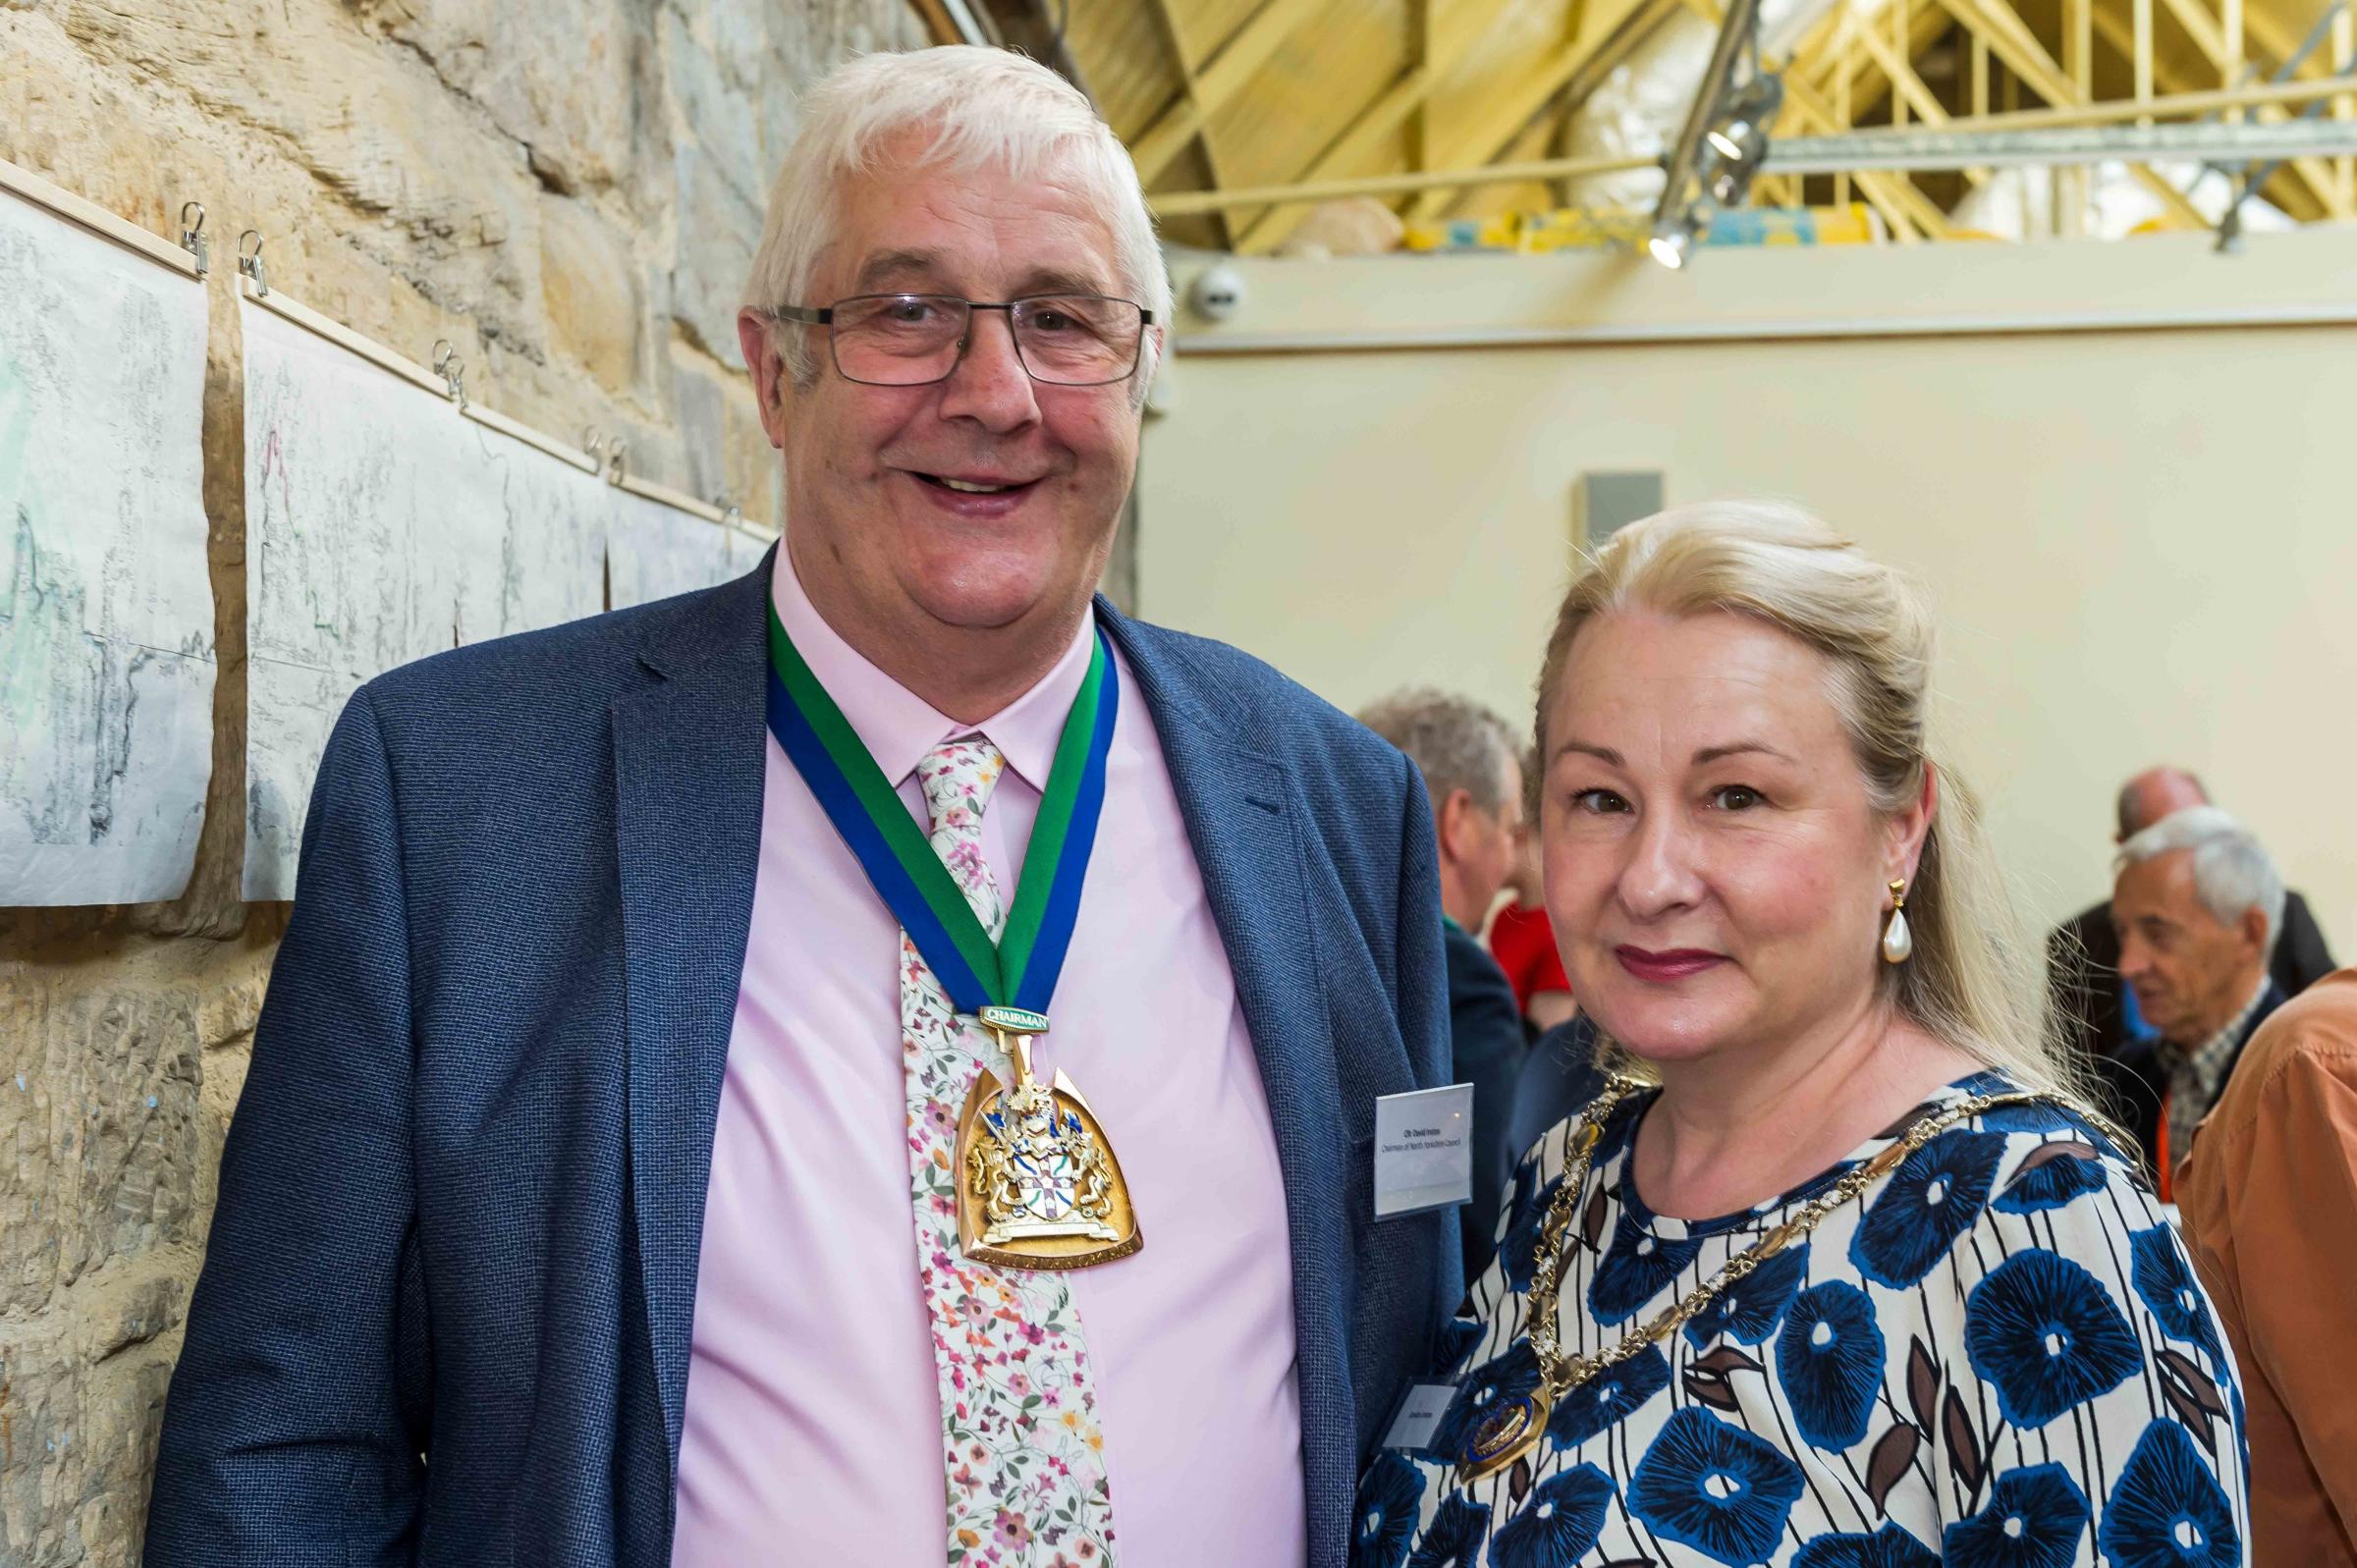 From left, Cllr David Ireton (NYCC Chairman) and Sandra Iretron at Swaledale Festival Chairmans Reception Picture: Gray Walker - Scenicview Gallery & Studio 